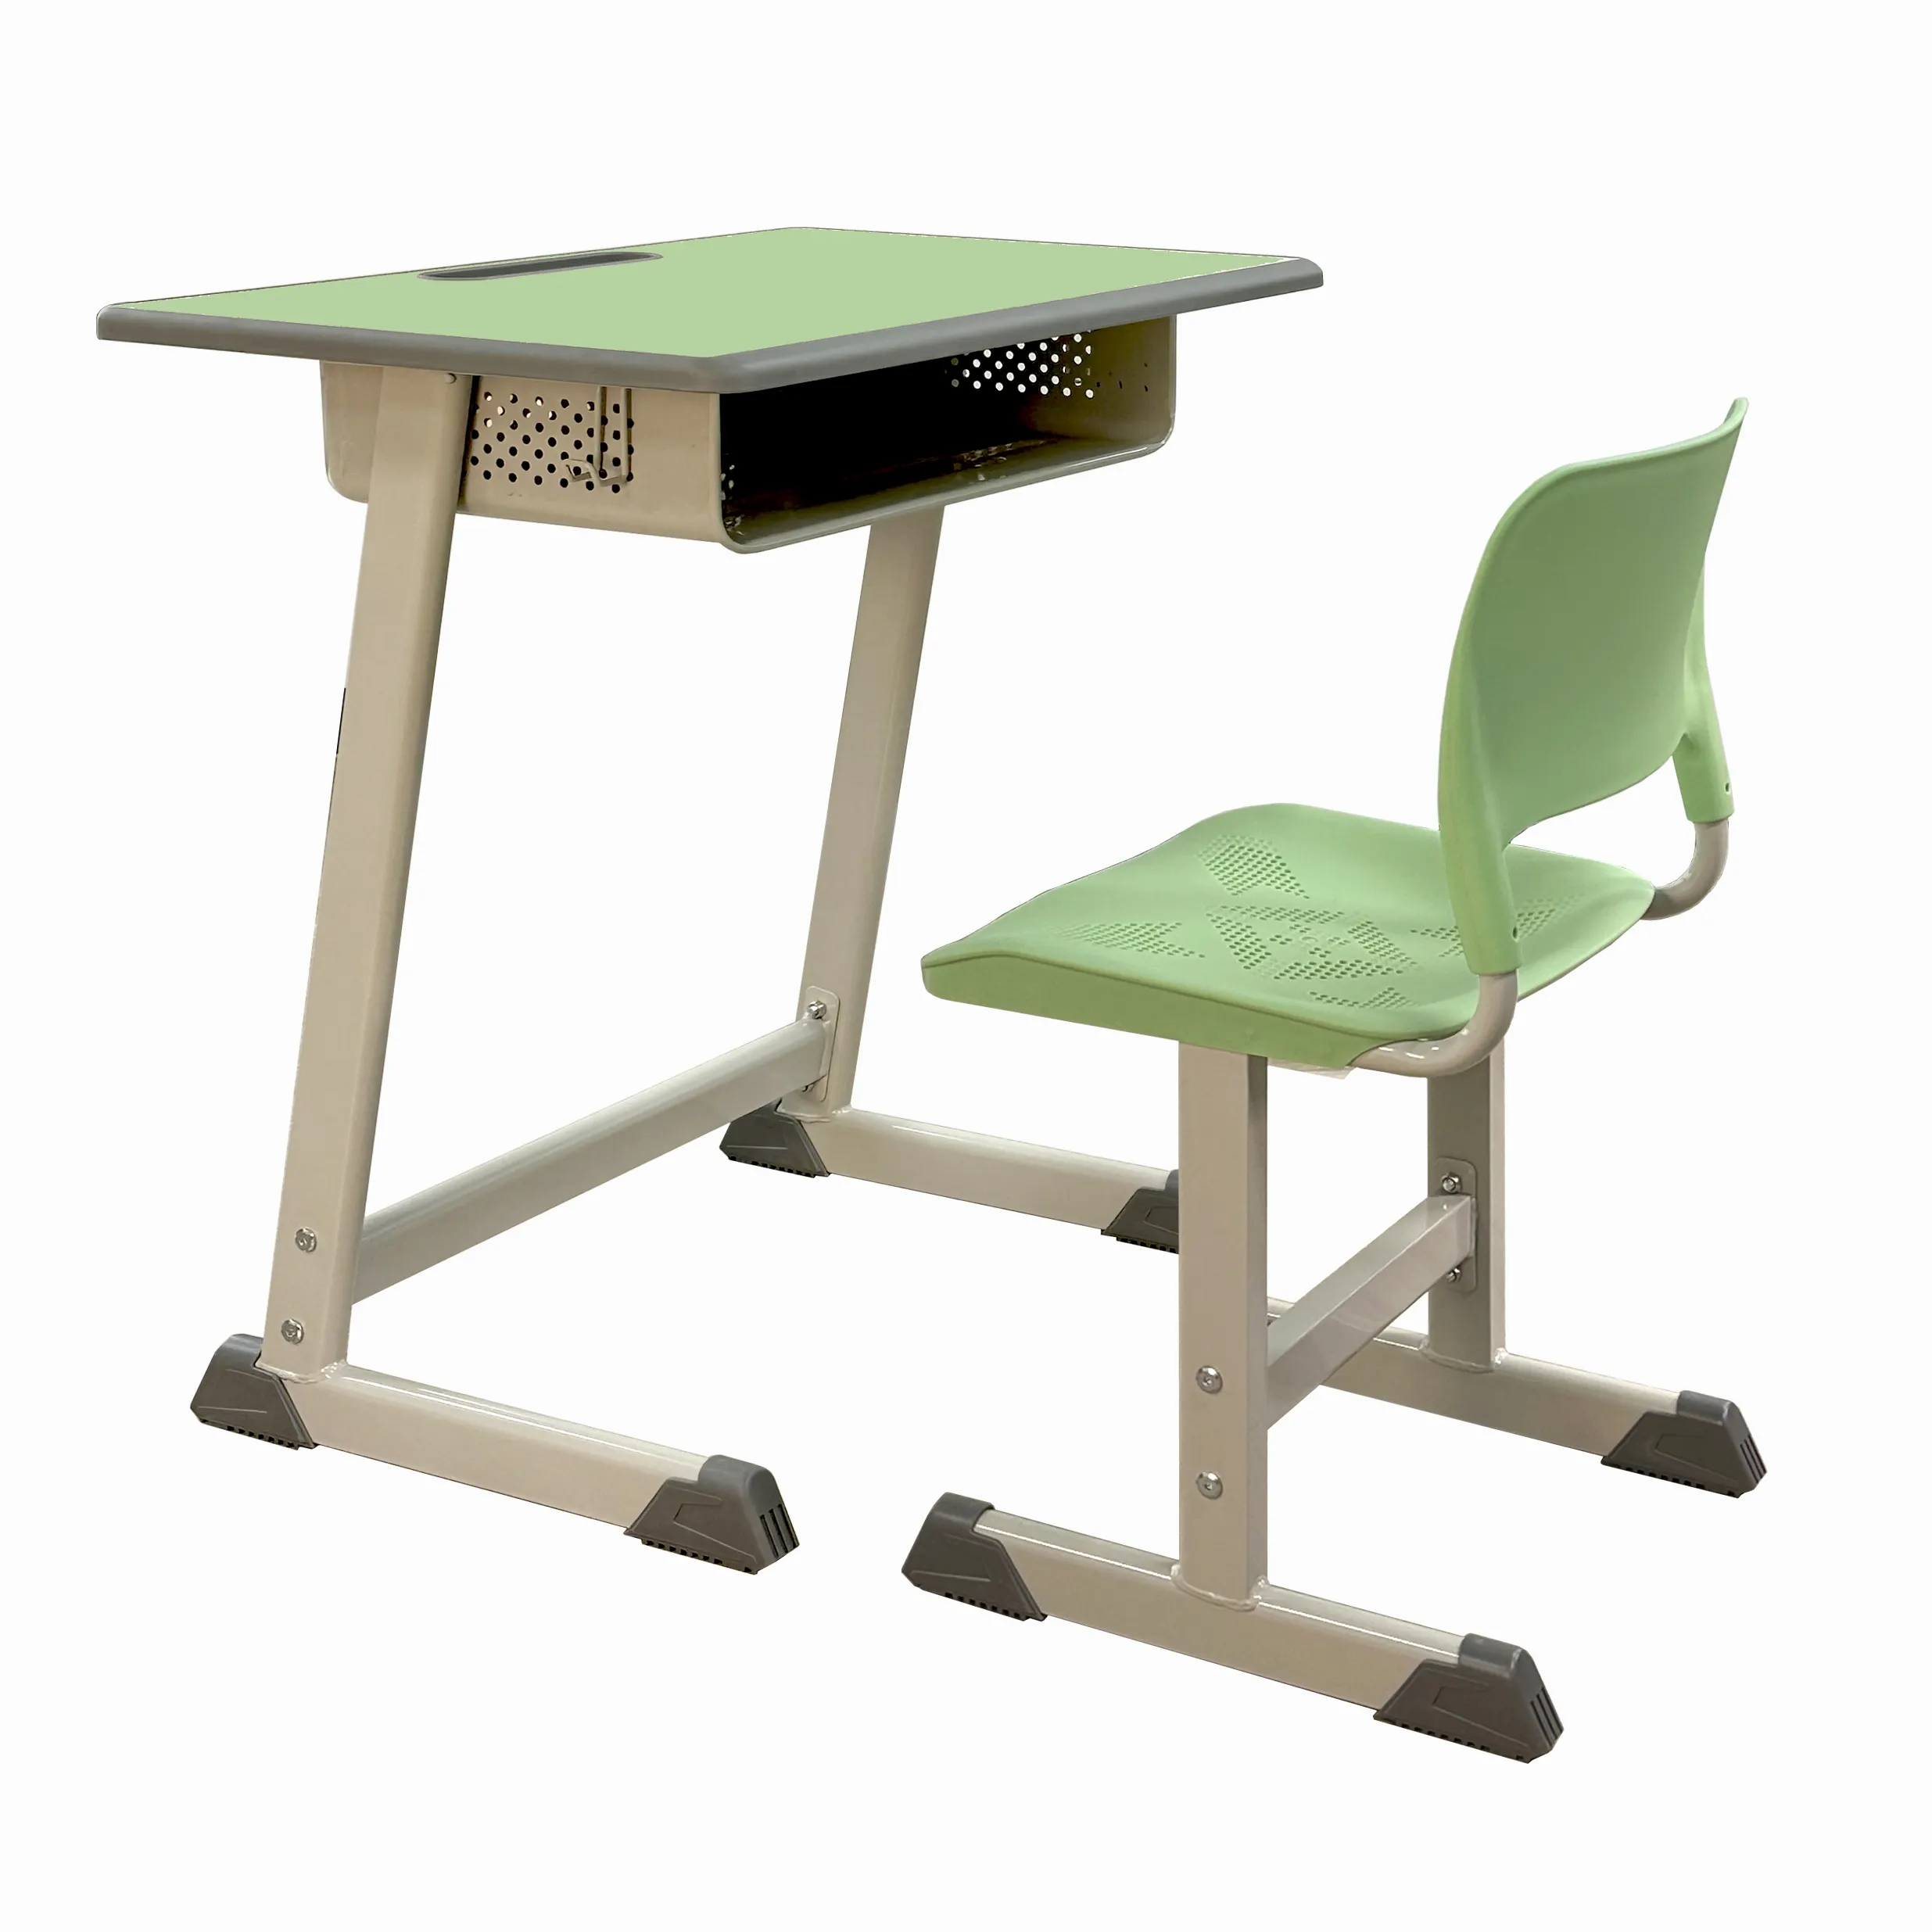 Factory Outlet Metal and Wooden Seat for School Students Favorite in Europe and America for Learning